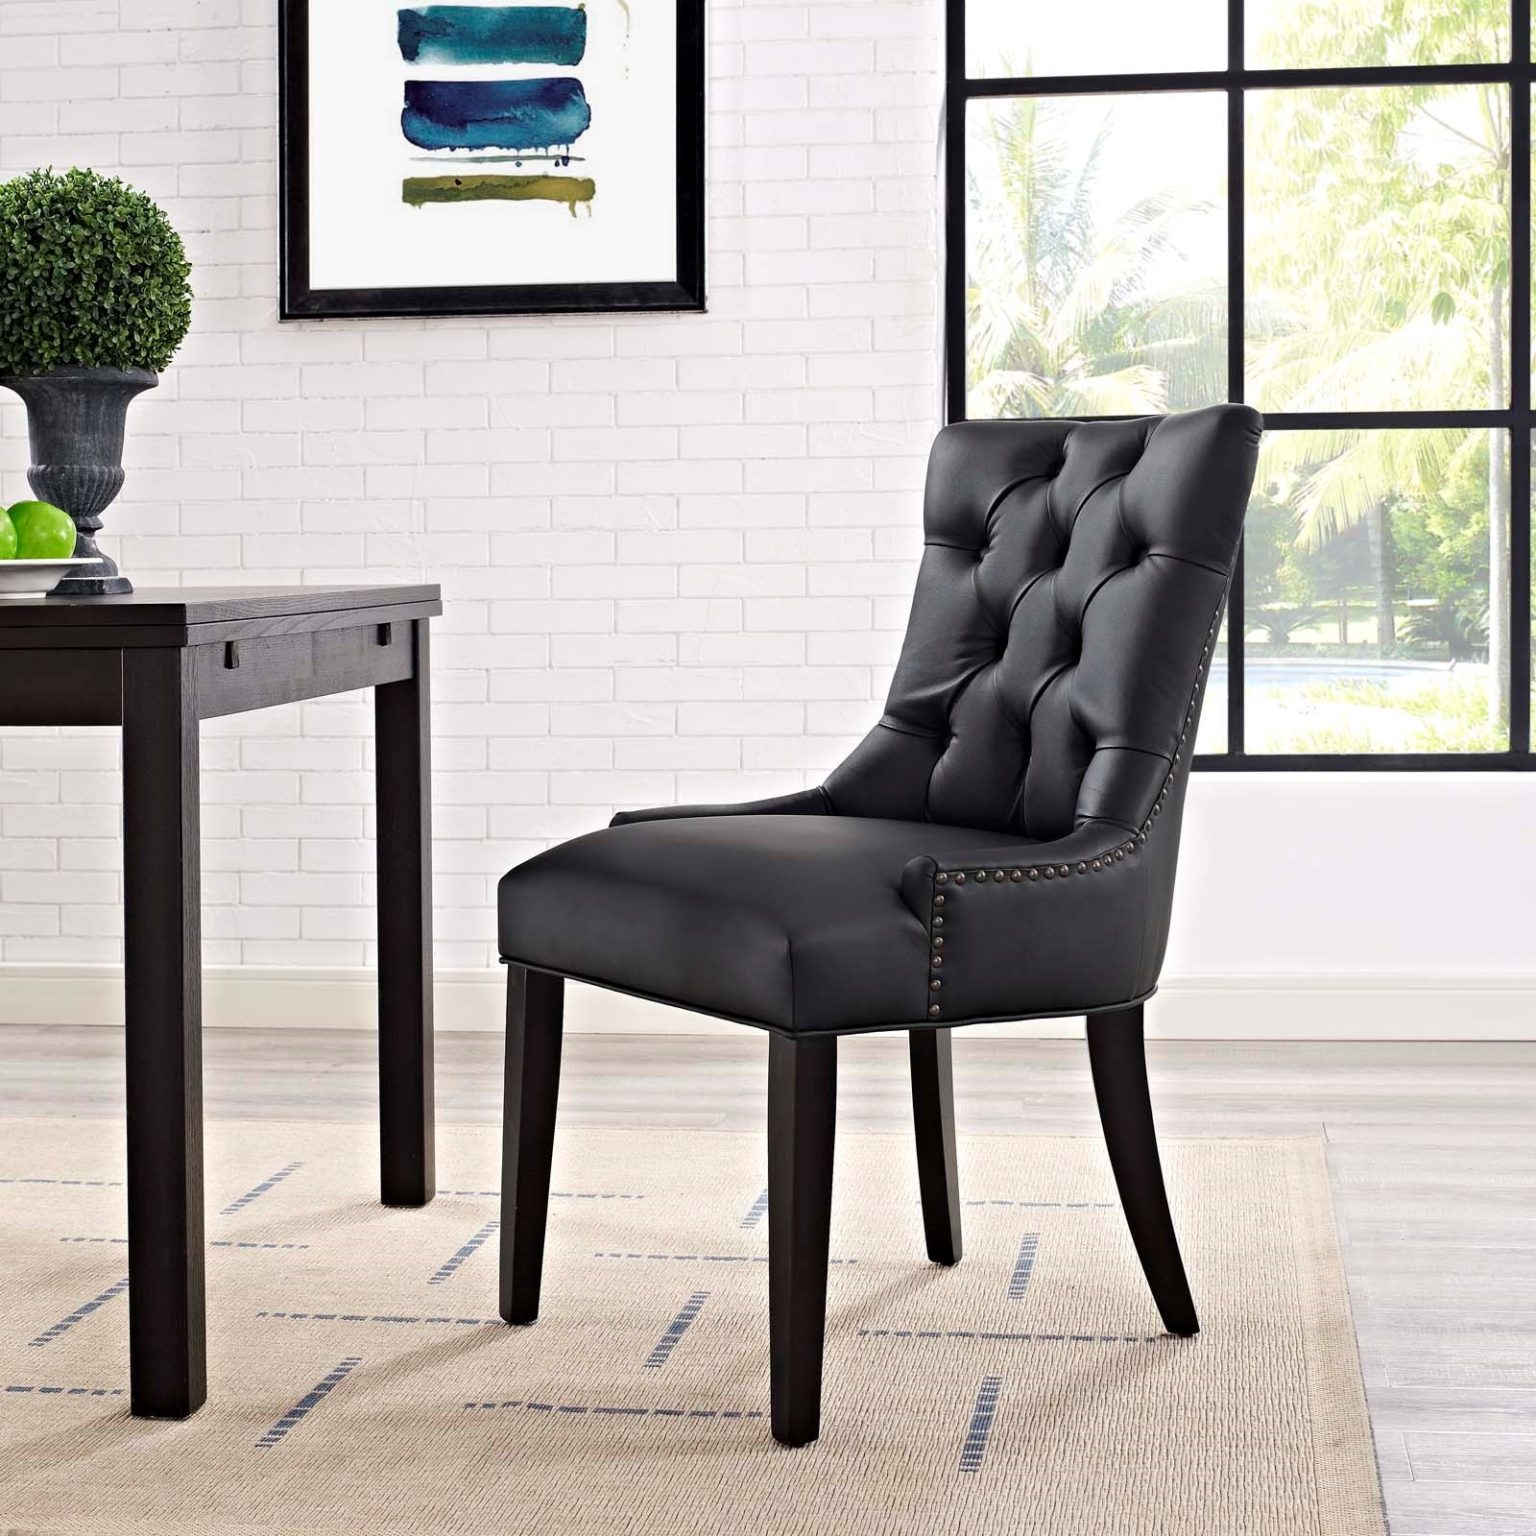 Regent Tufted Faux Leather Dining Chair in Black - Hyme Furniture